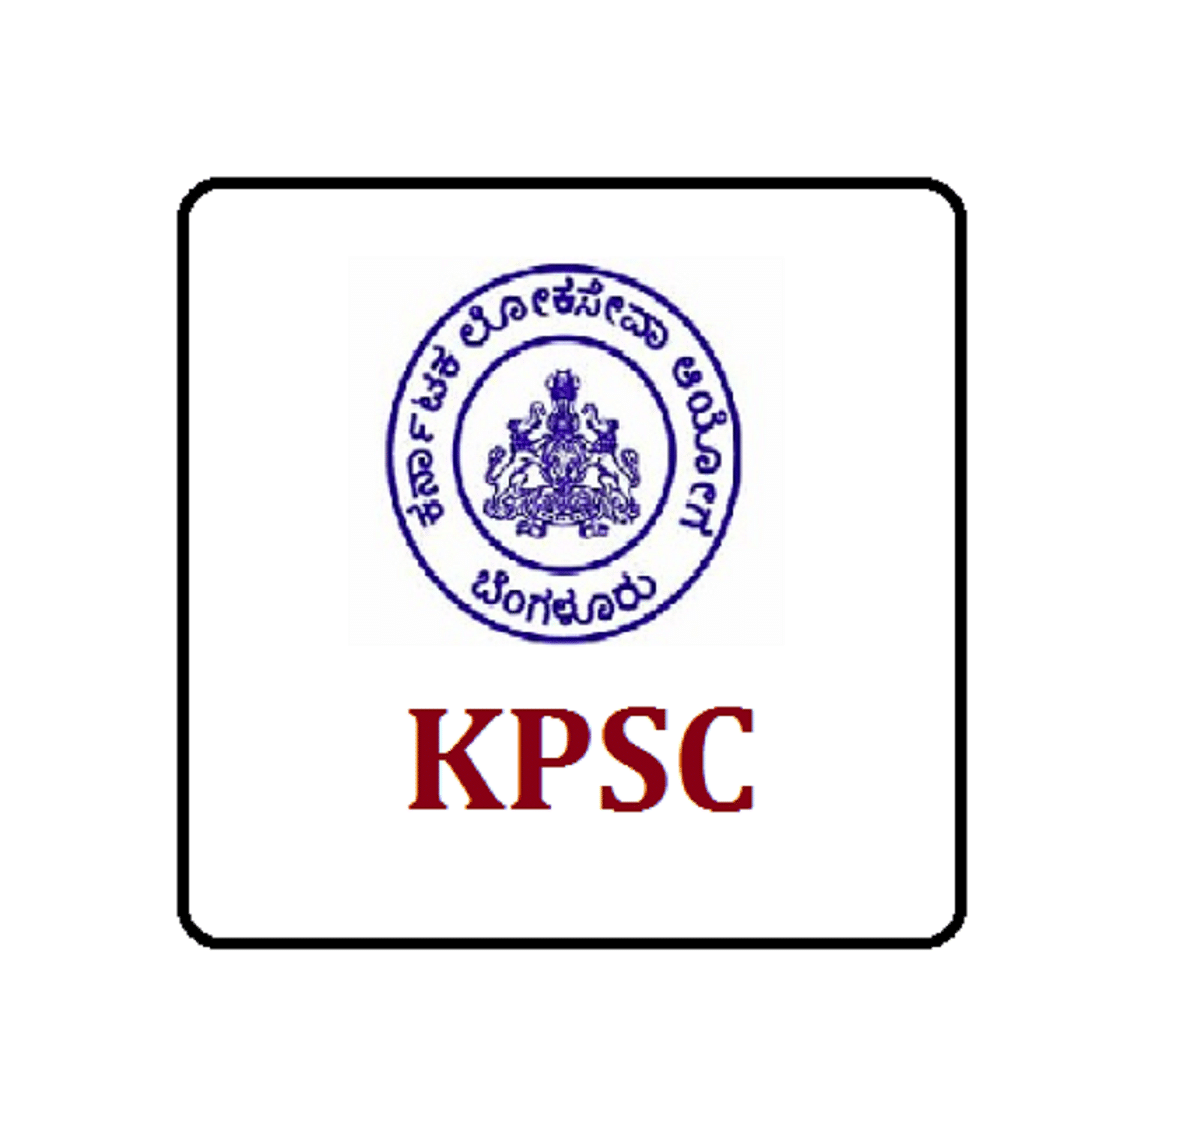 KPSC Exam 2020: Application Process to Conclude on April 30, Check Eligibility and Other Details Here